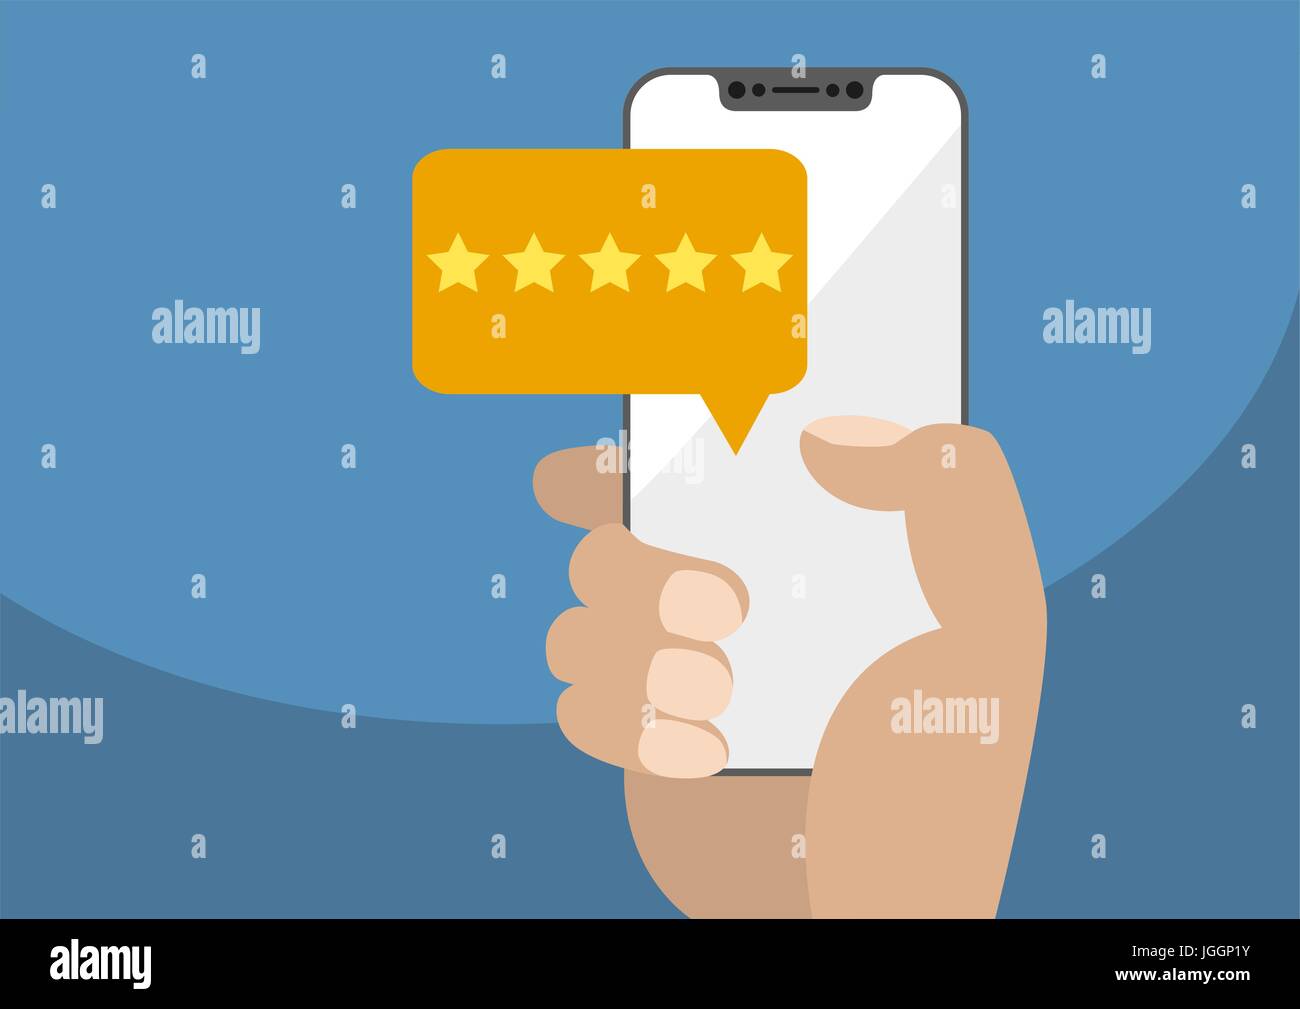 Positive online rating and customer survey vector illustration. Hand holding modern bezel-free / frameless smartphone with yellow five star rating mes Stock Vector